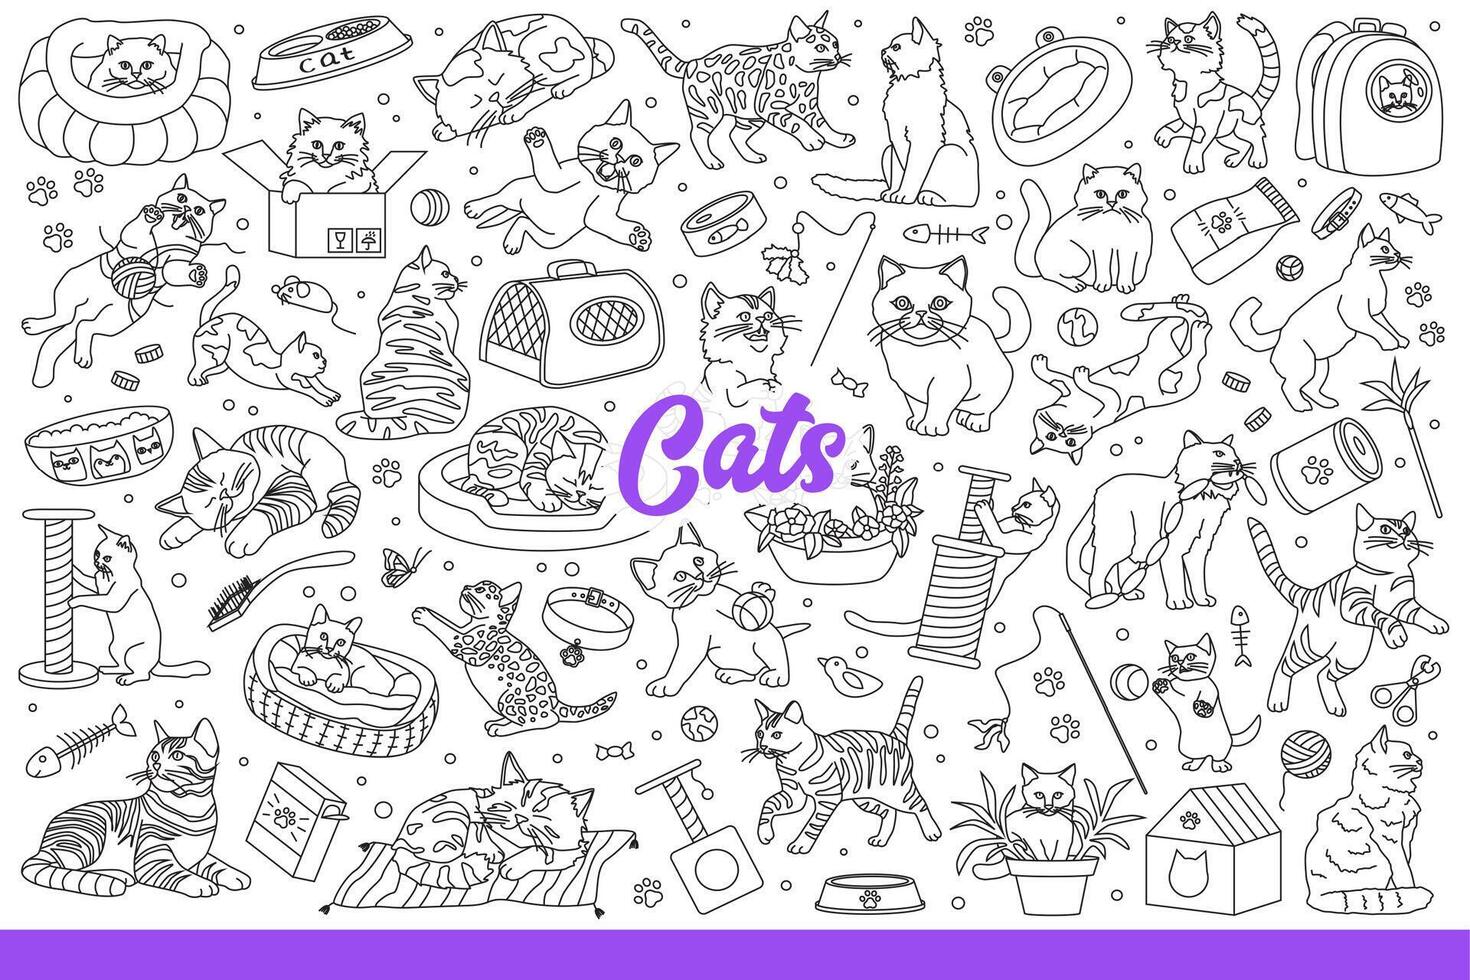 Domestic cats have fun with favorite toys or sleep on beds and sharpen claws. Hand drawn doodle. vector